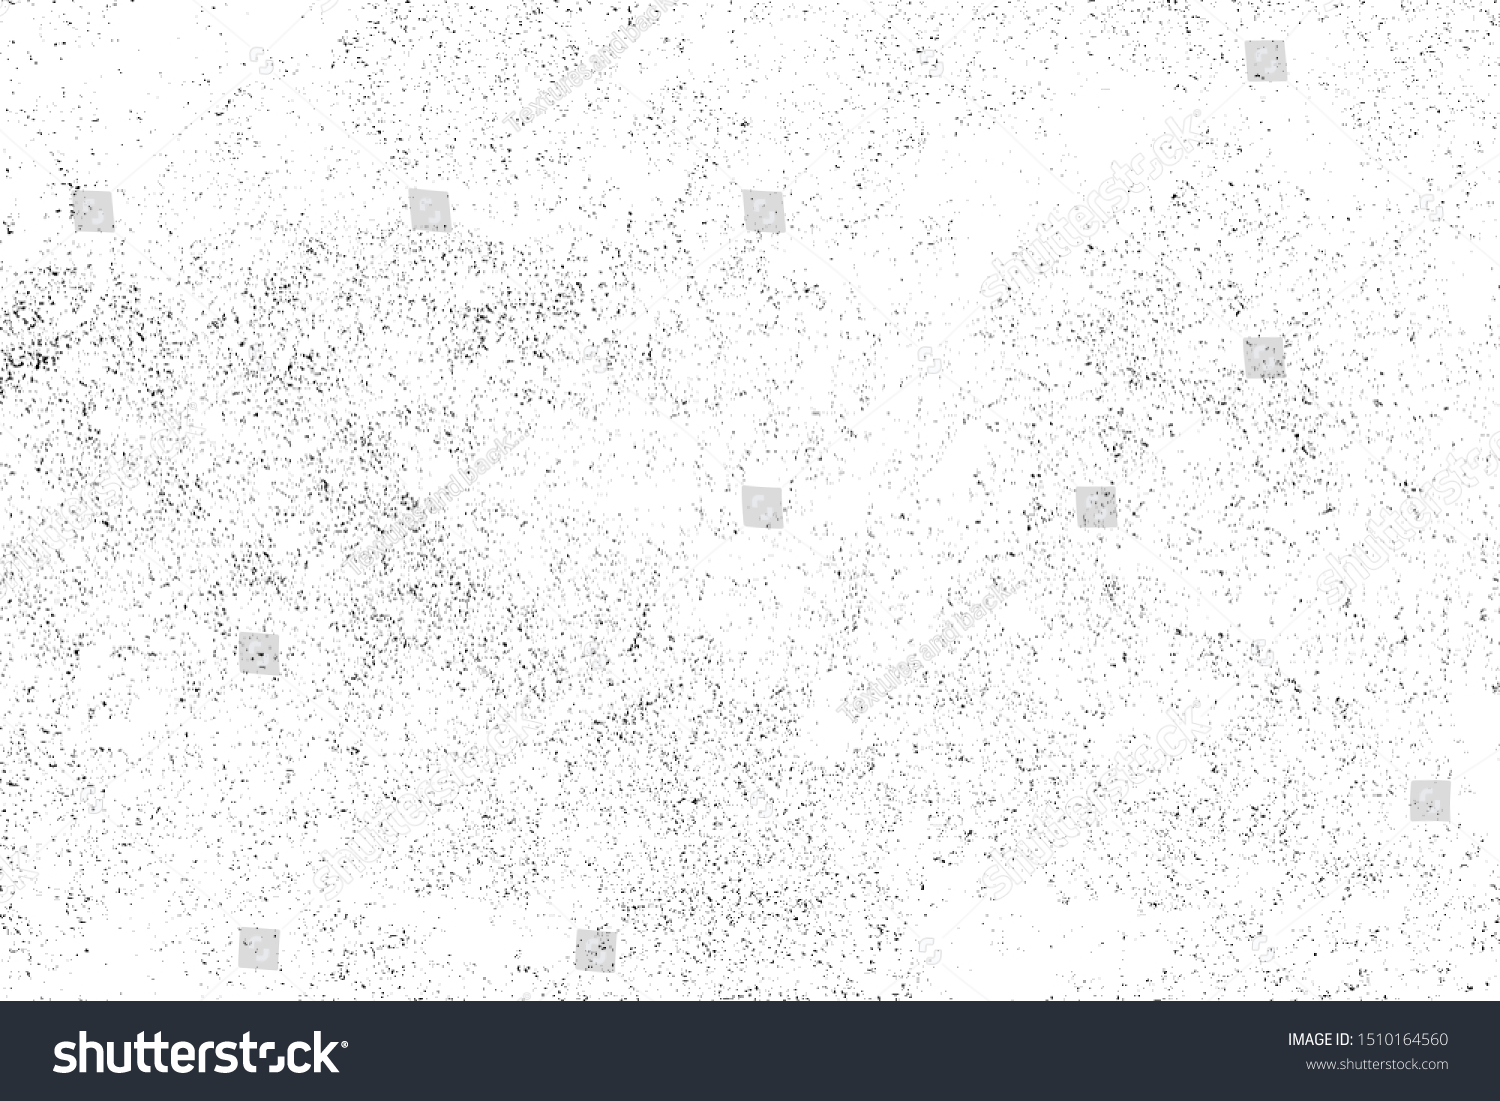 Grunge background black and white. Cracks, chips, scratches, dust texture. Abstract city wall. Dirty old surface. Vector vintage pattern #1510164560